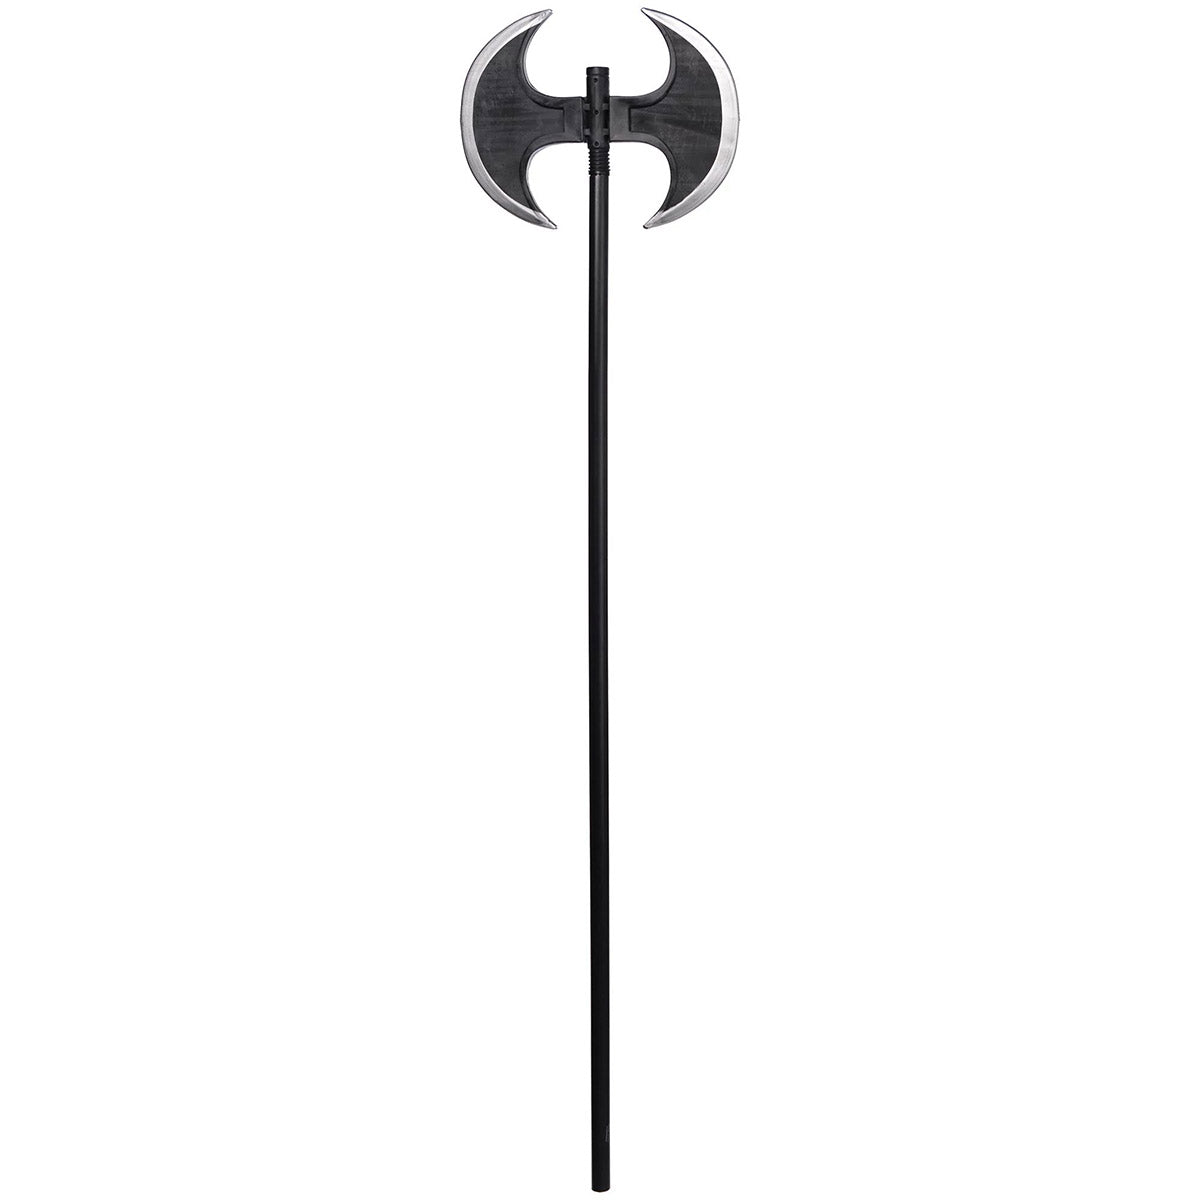 SUIT YOURSELF COSTUME CO. Costume Accessories Executioner's Axe 809801702577